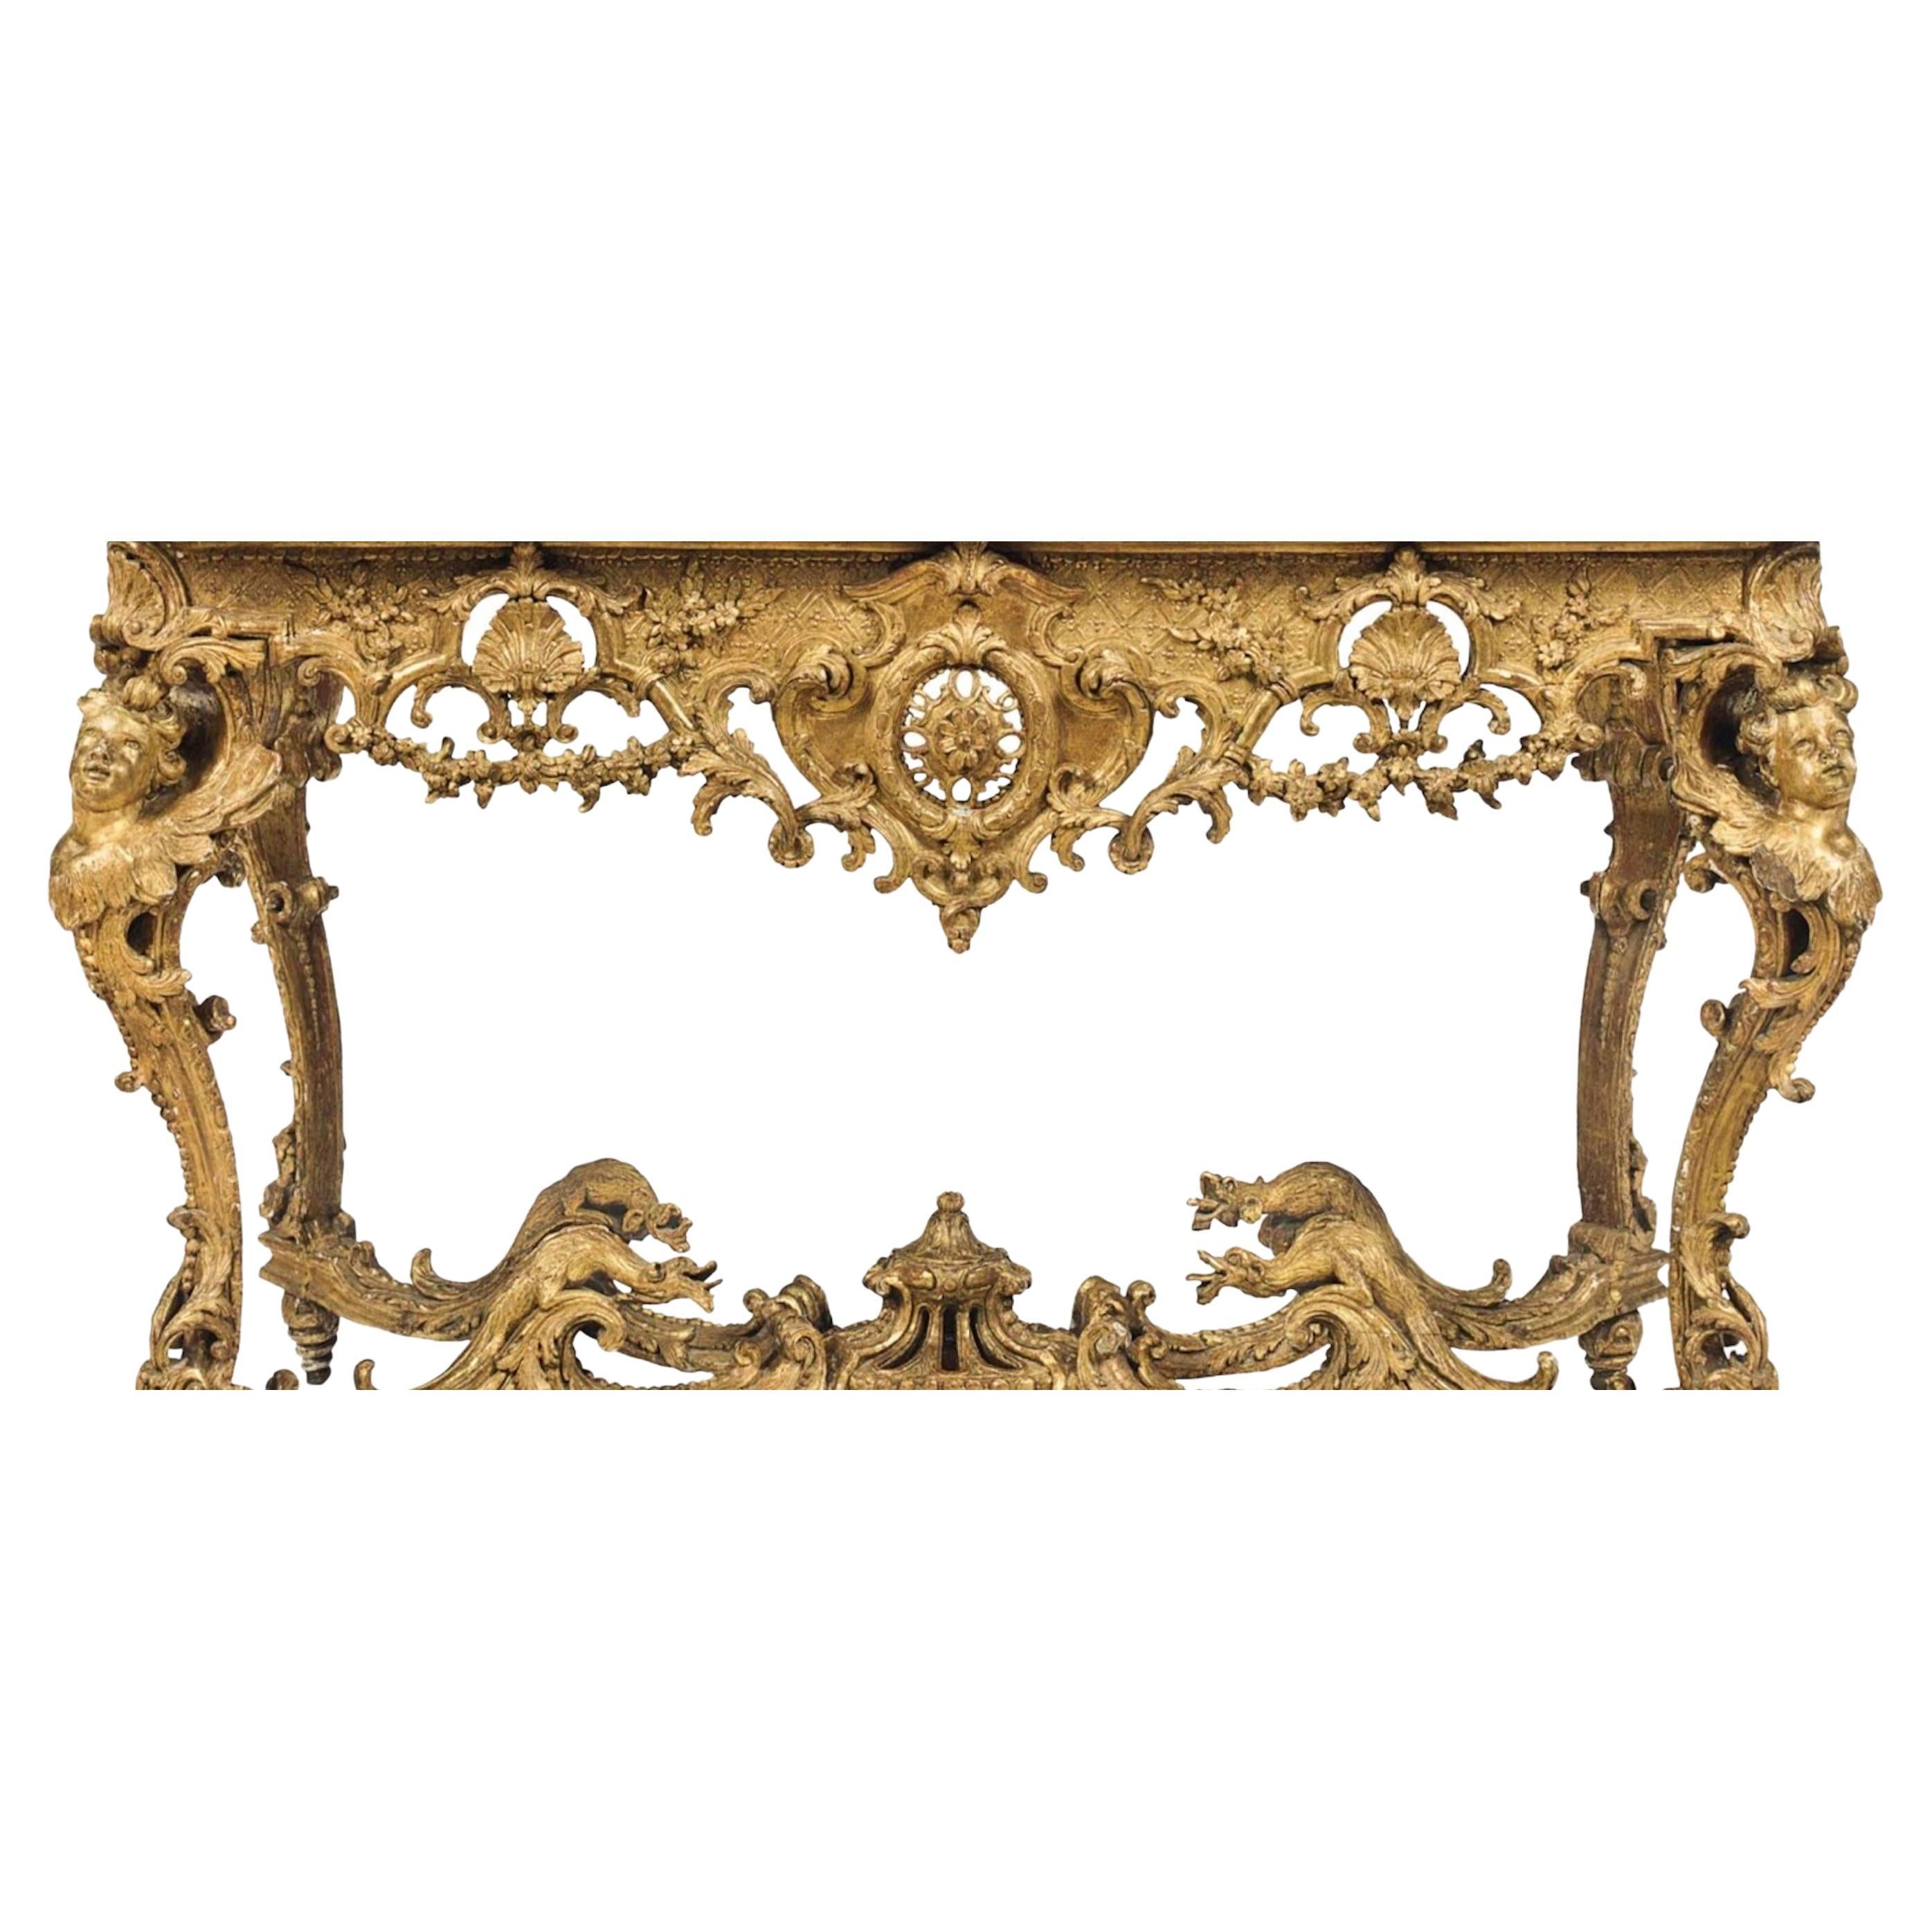 A regence giltwood console table was created in approximately 1720-1725. The later Siena marble top above a pierced carved frieze is decorated with floral swags, the bust-headed scrolled legs with wings are joined by a conforming X-stretcher with